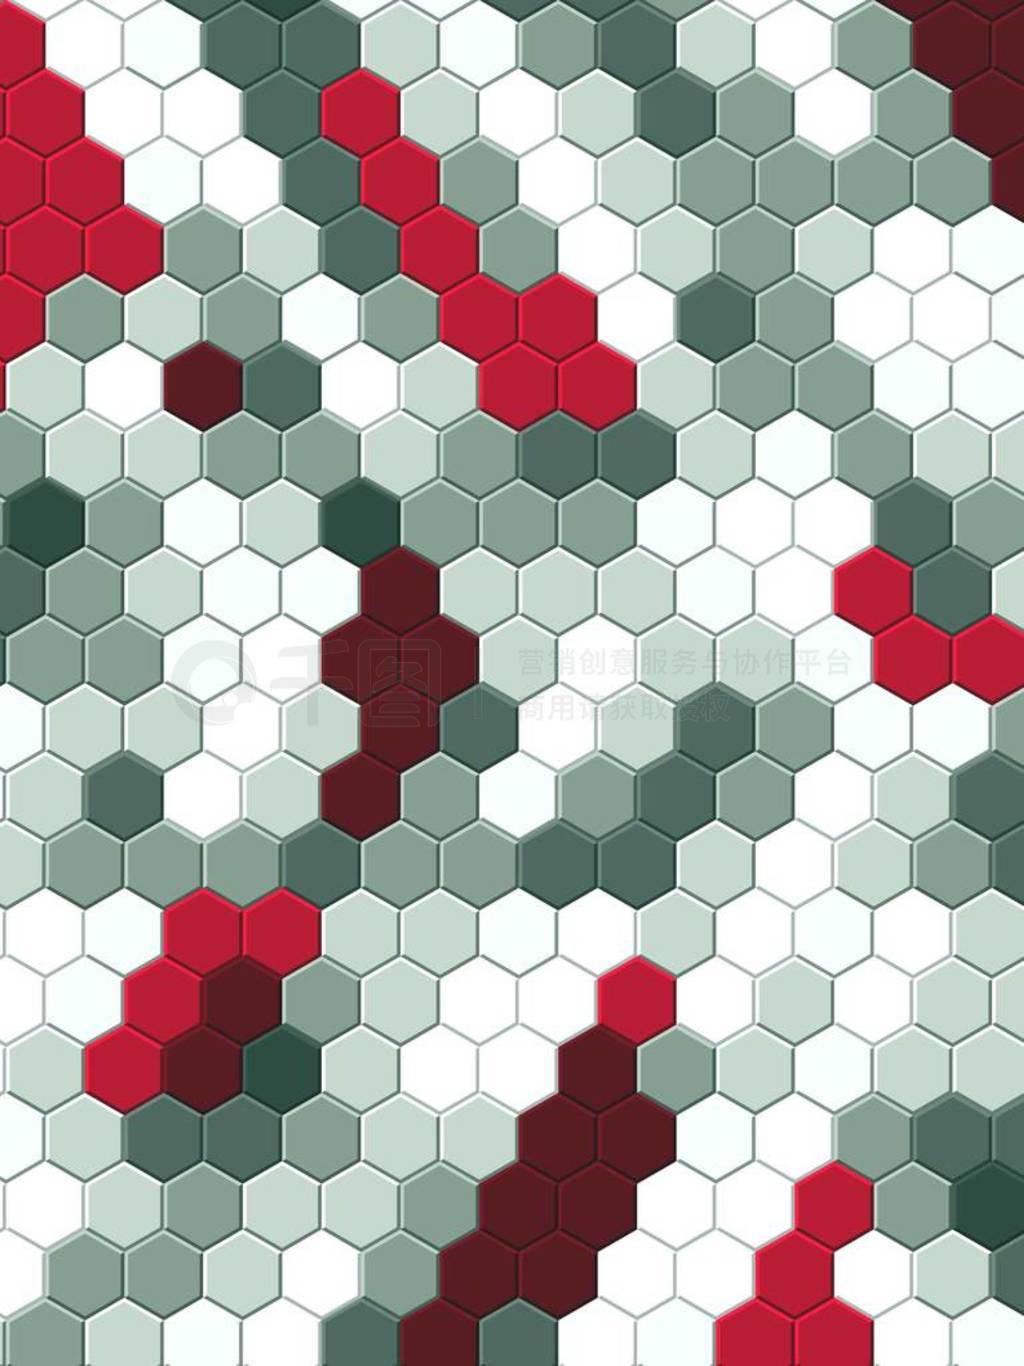 Honeycomb Dark red, grid seamless background or Hexagonal cell